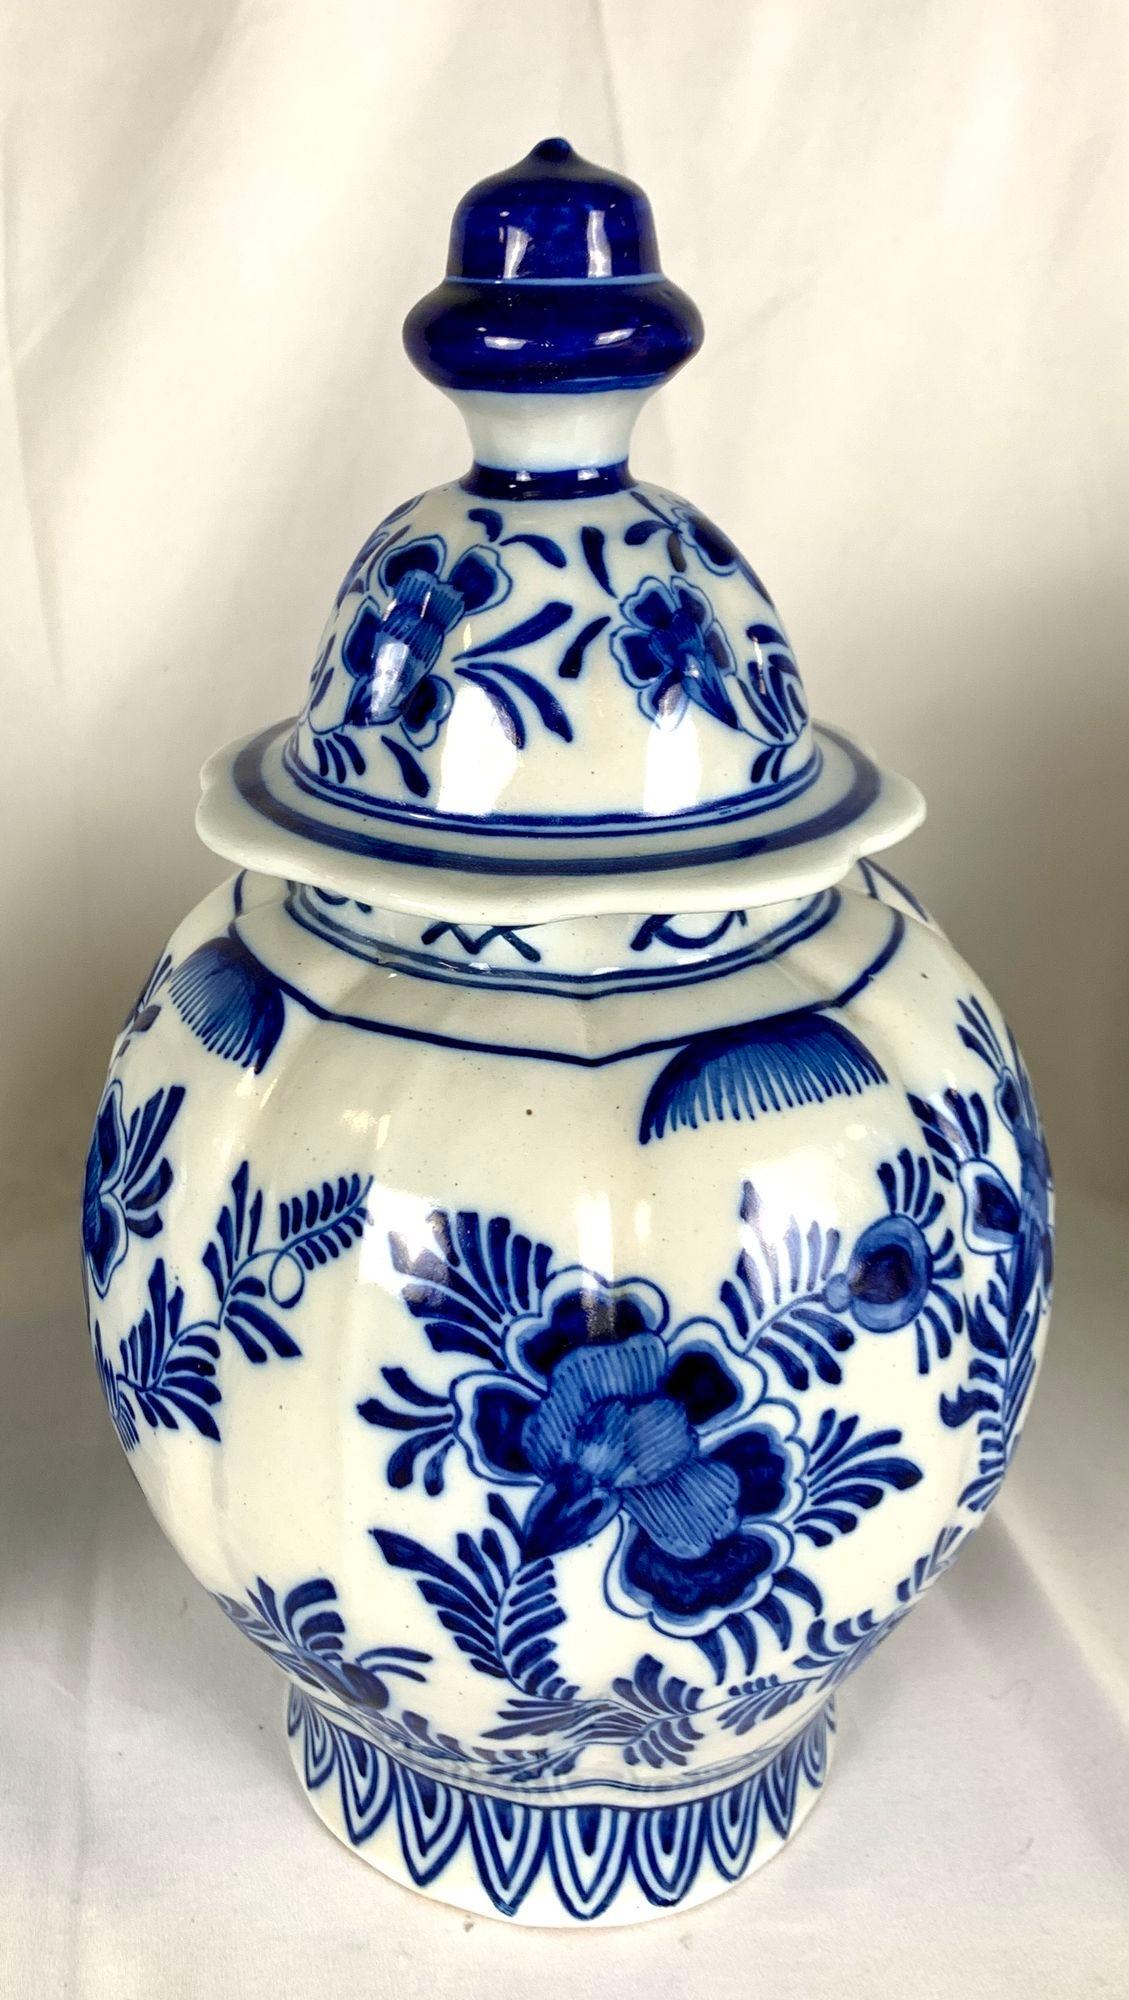 A pair of blue and white Dutch Delft jars hand painted in the Netherlands, in the late 19th or early 20th Century.
Hand painted all around on a lobed body with a chinoiserie scene of a bird perched on rockwork, a figure of an oriental lady, and